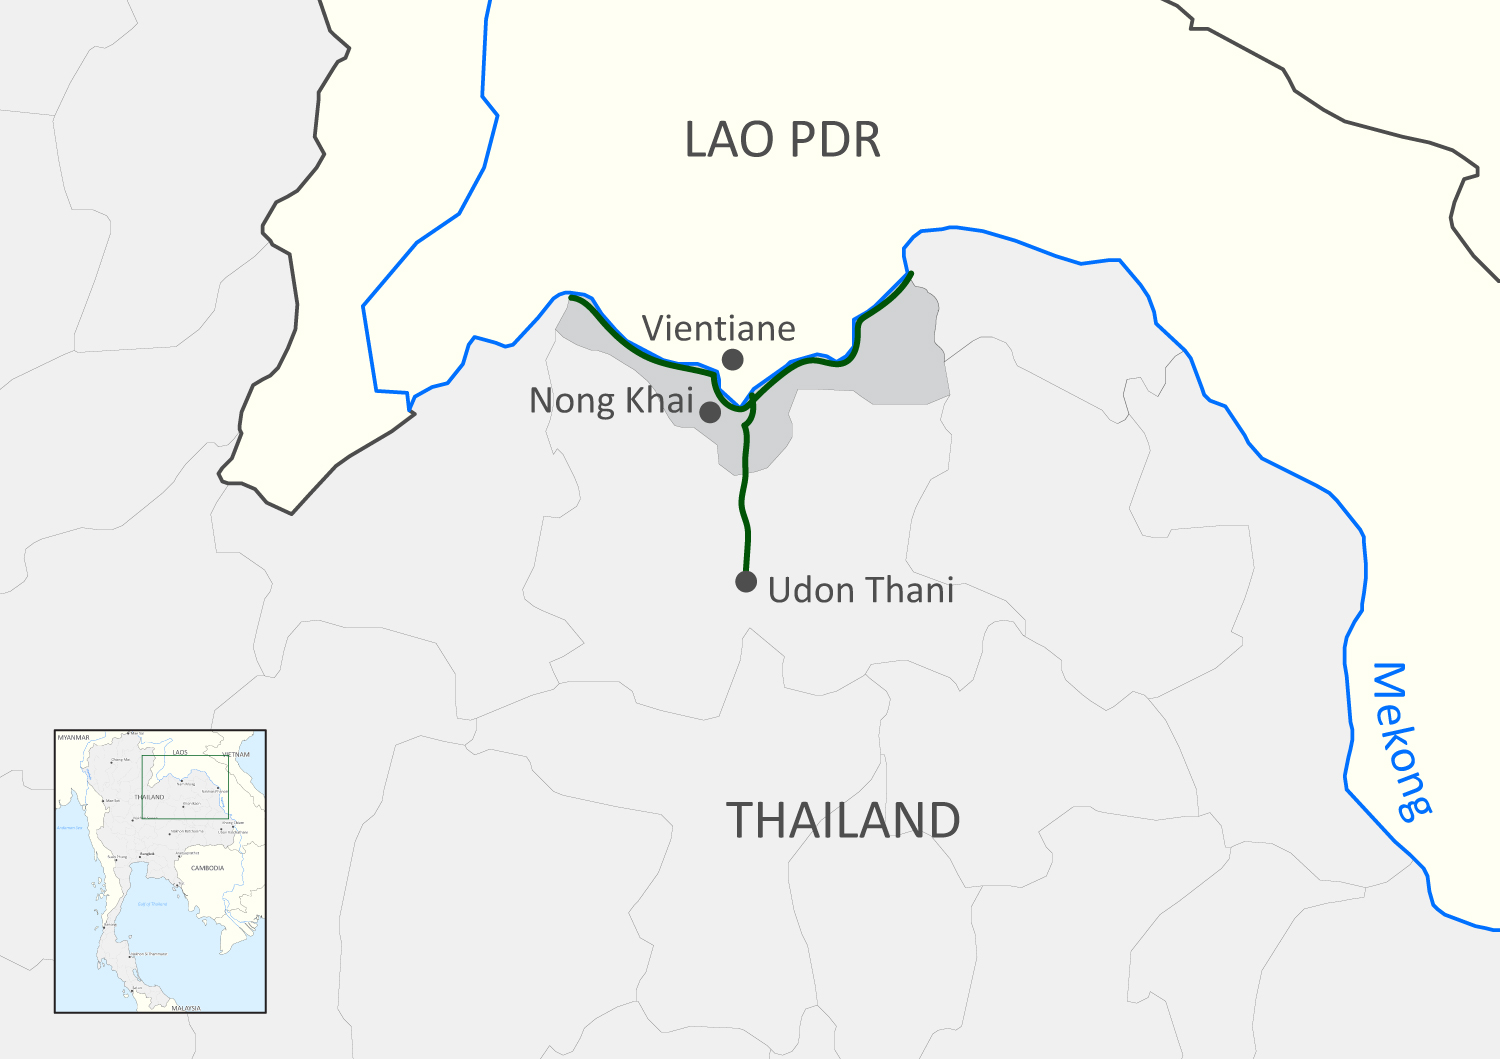 <p>The route from Udon Thani to Nong Khai and along the Mekong River</p>